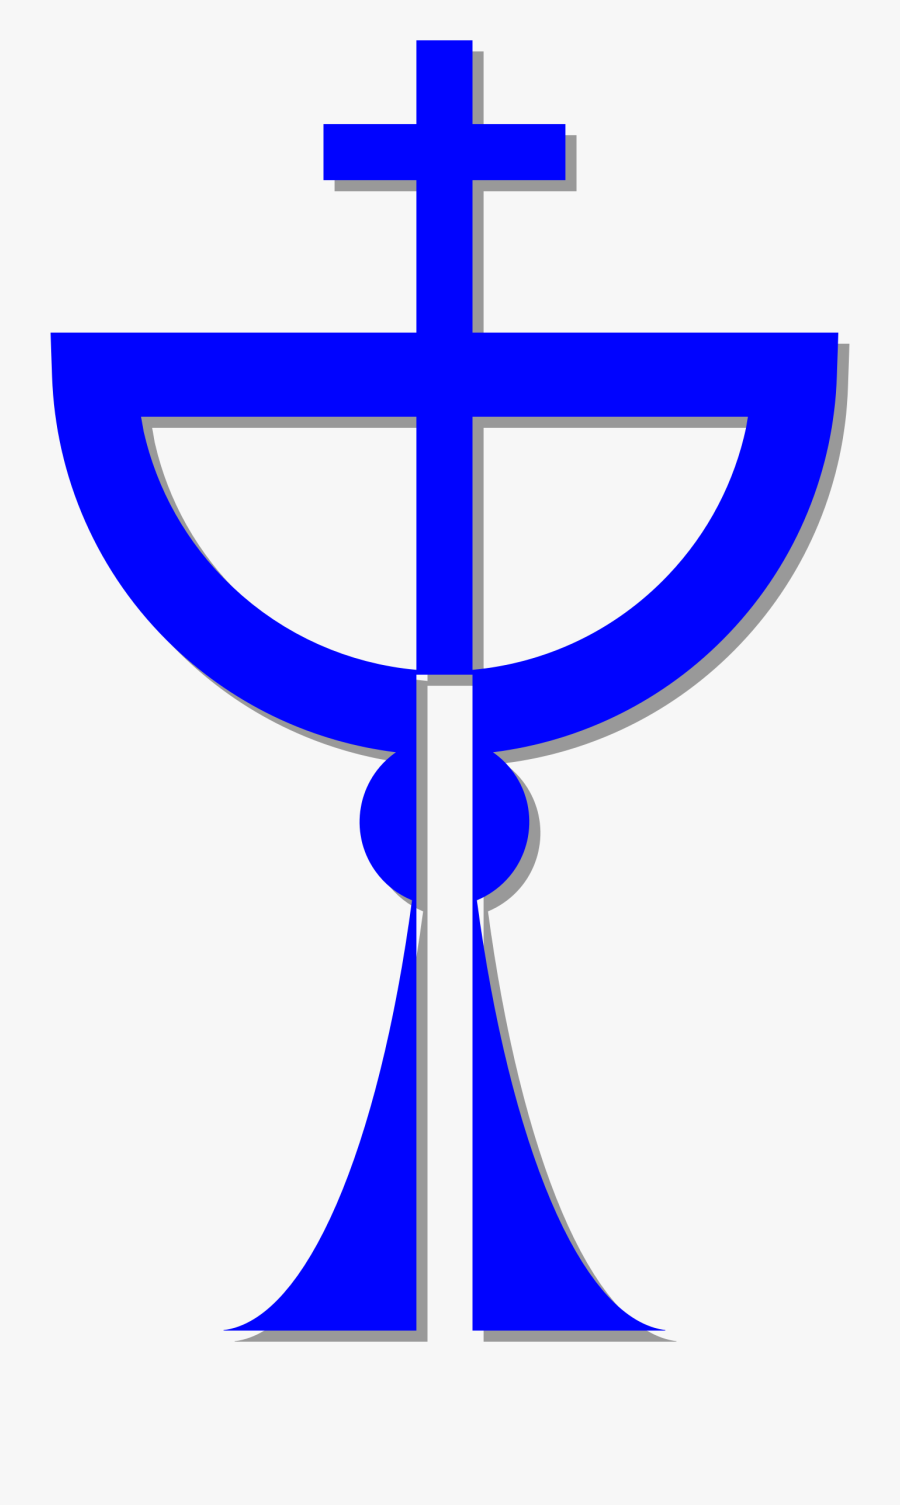 Symmetry,area,text - Chalice And Cross Hd, Transparent Clipart